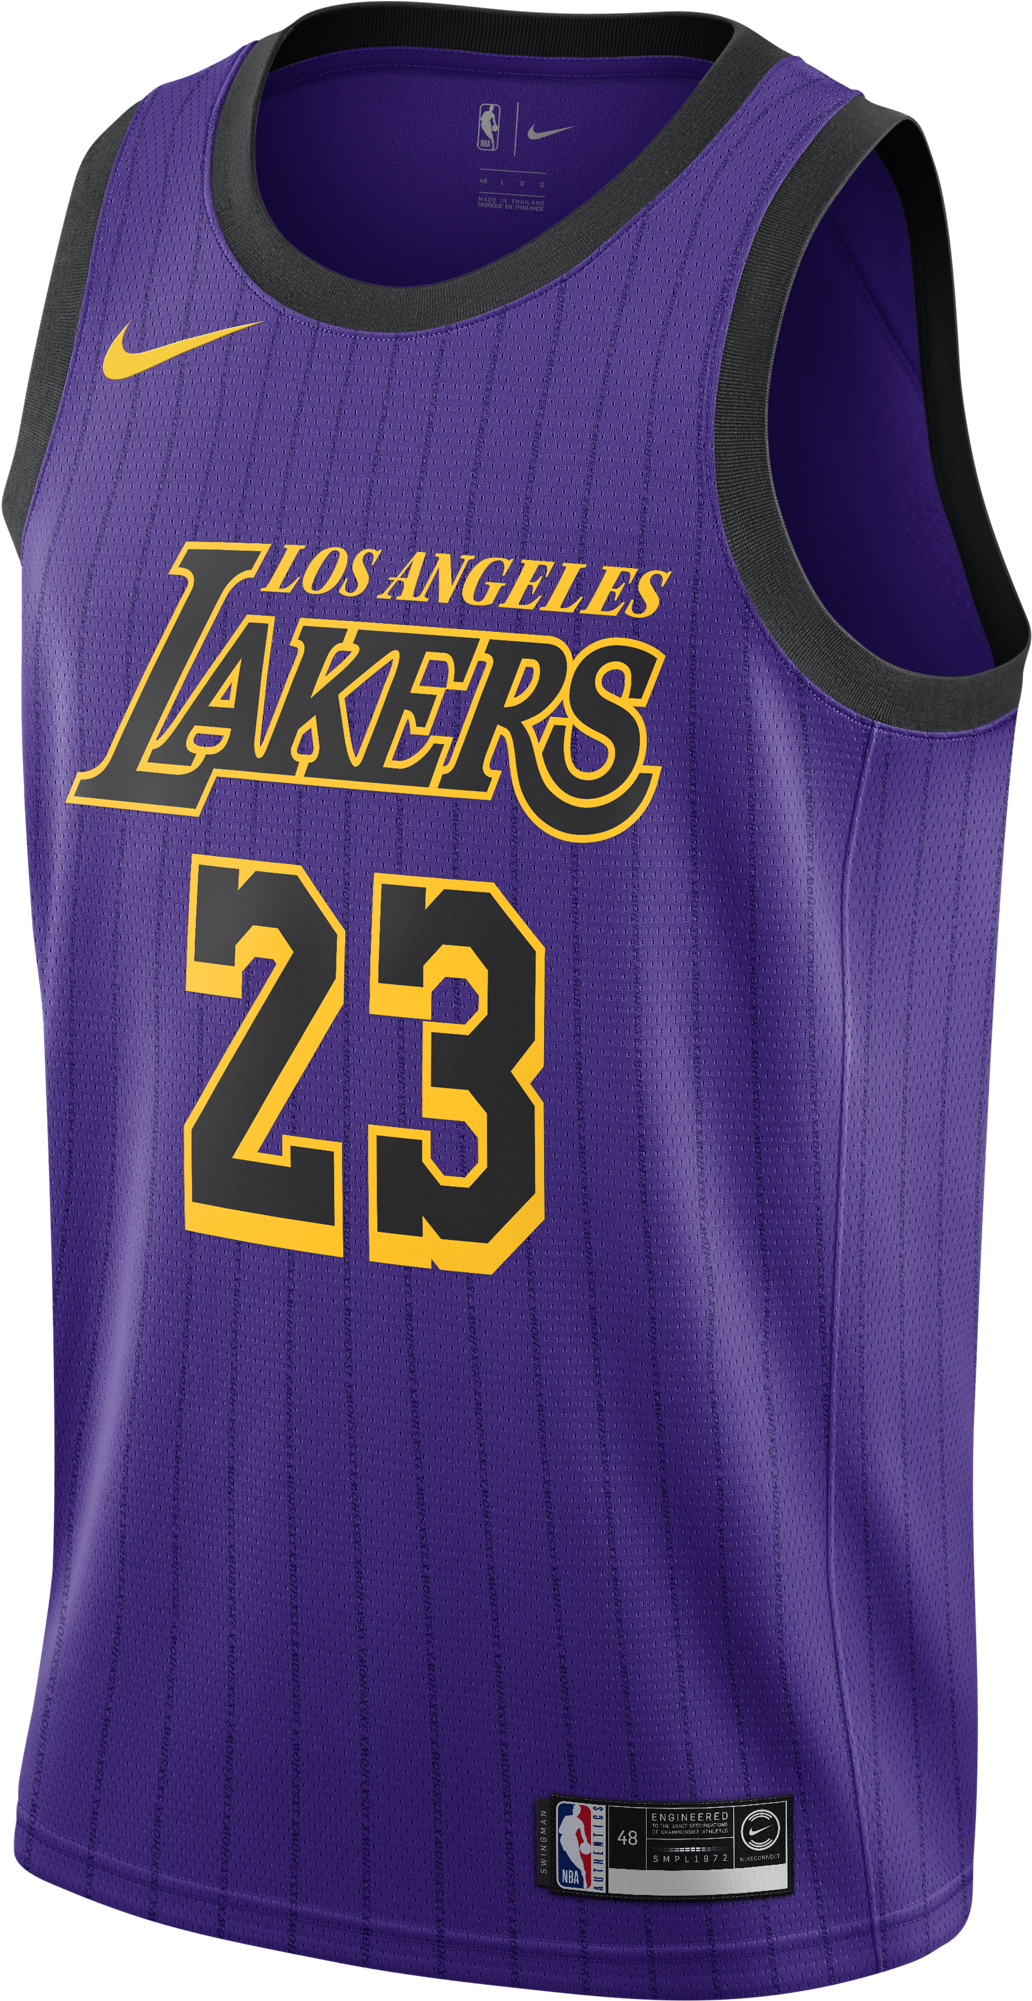 A Purple Basketball Jersey With Yellow Letters And Numbers